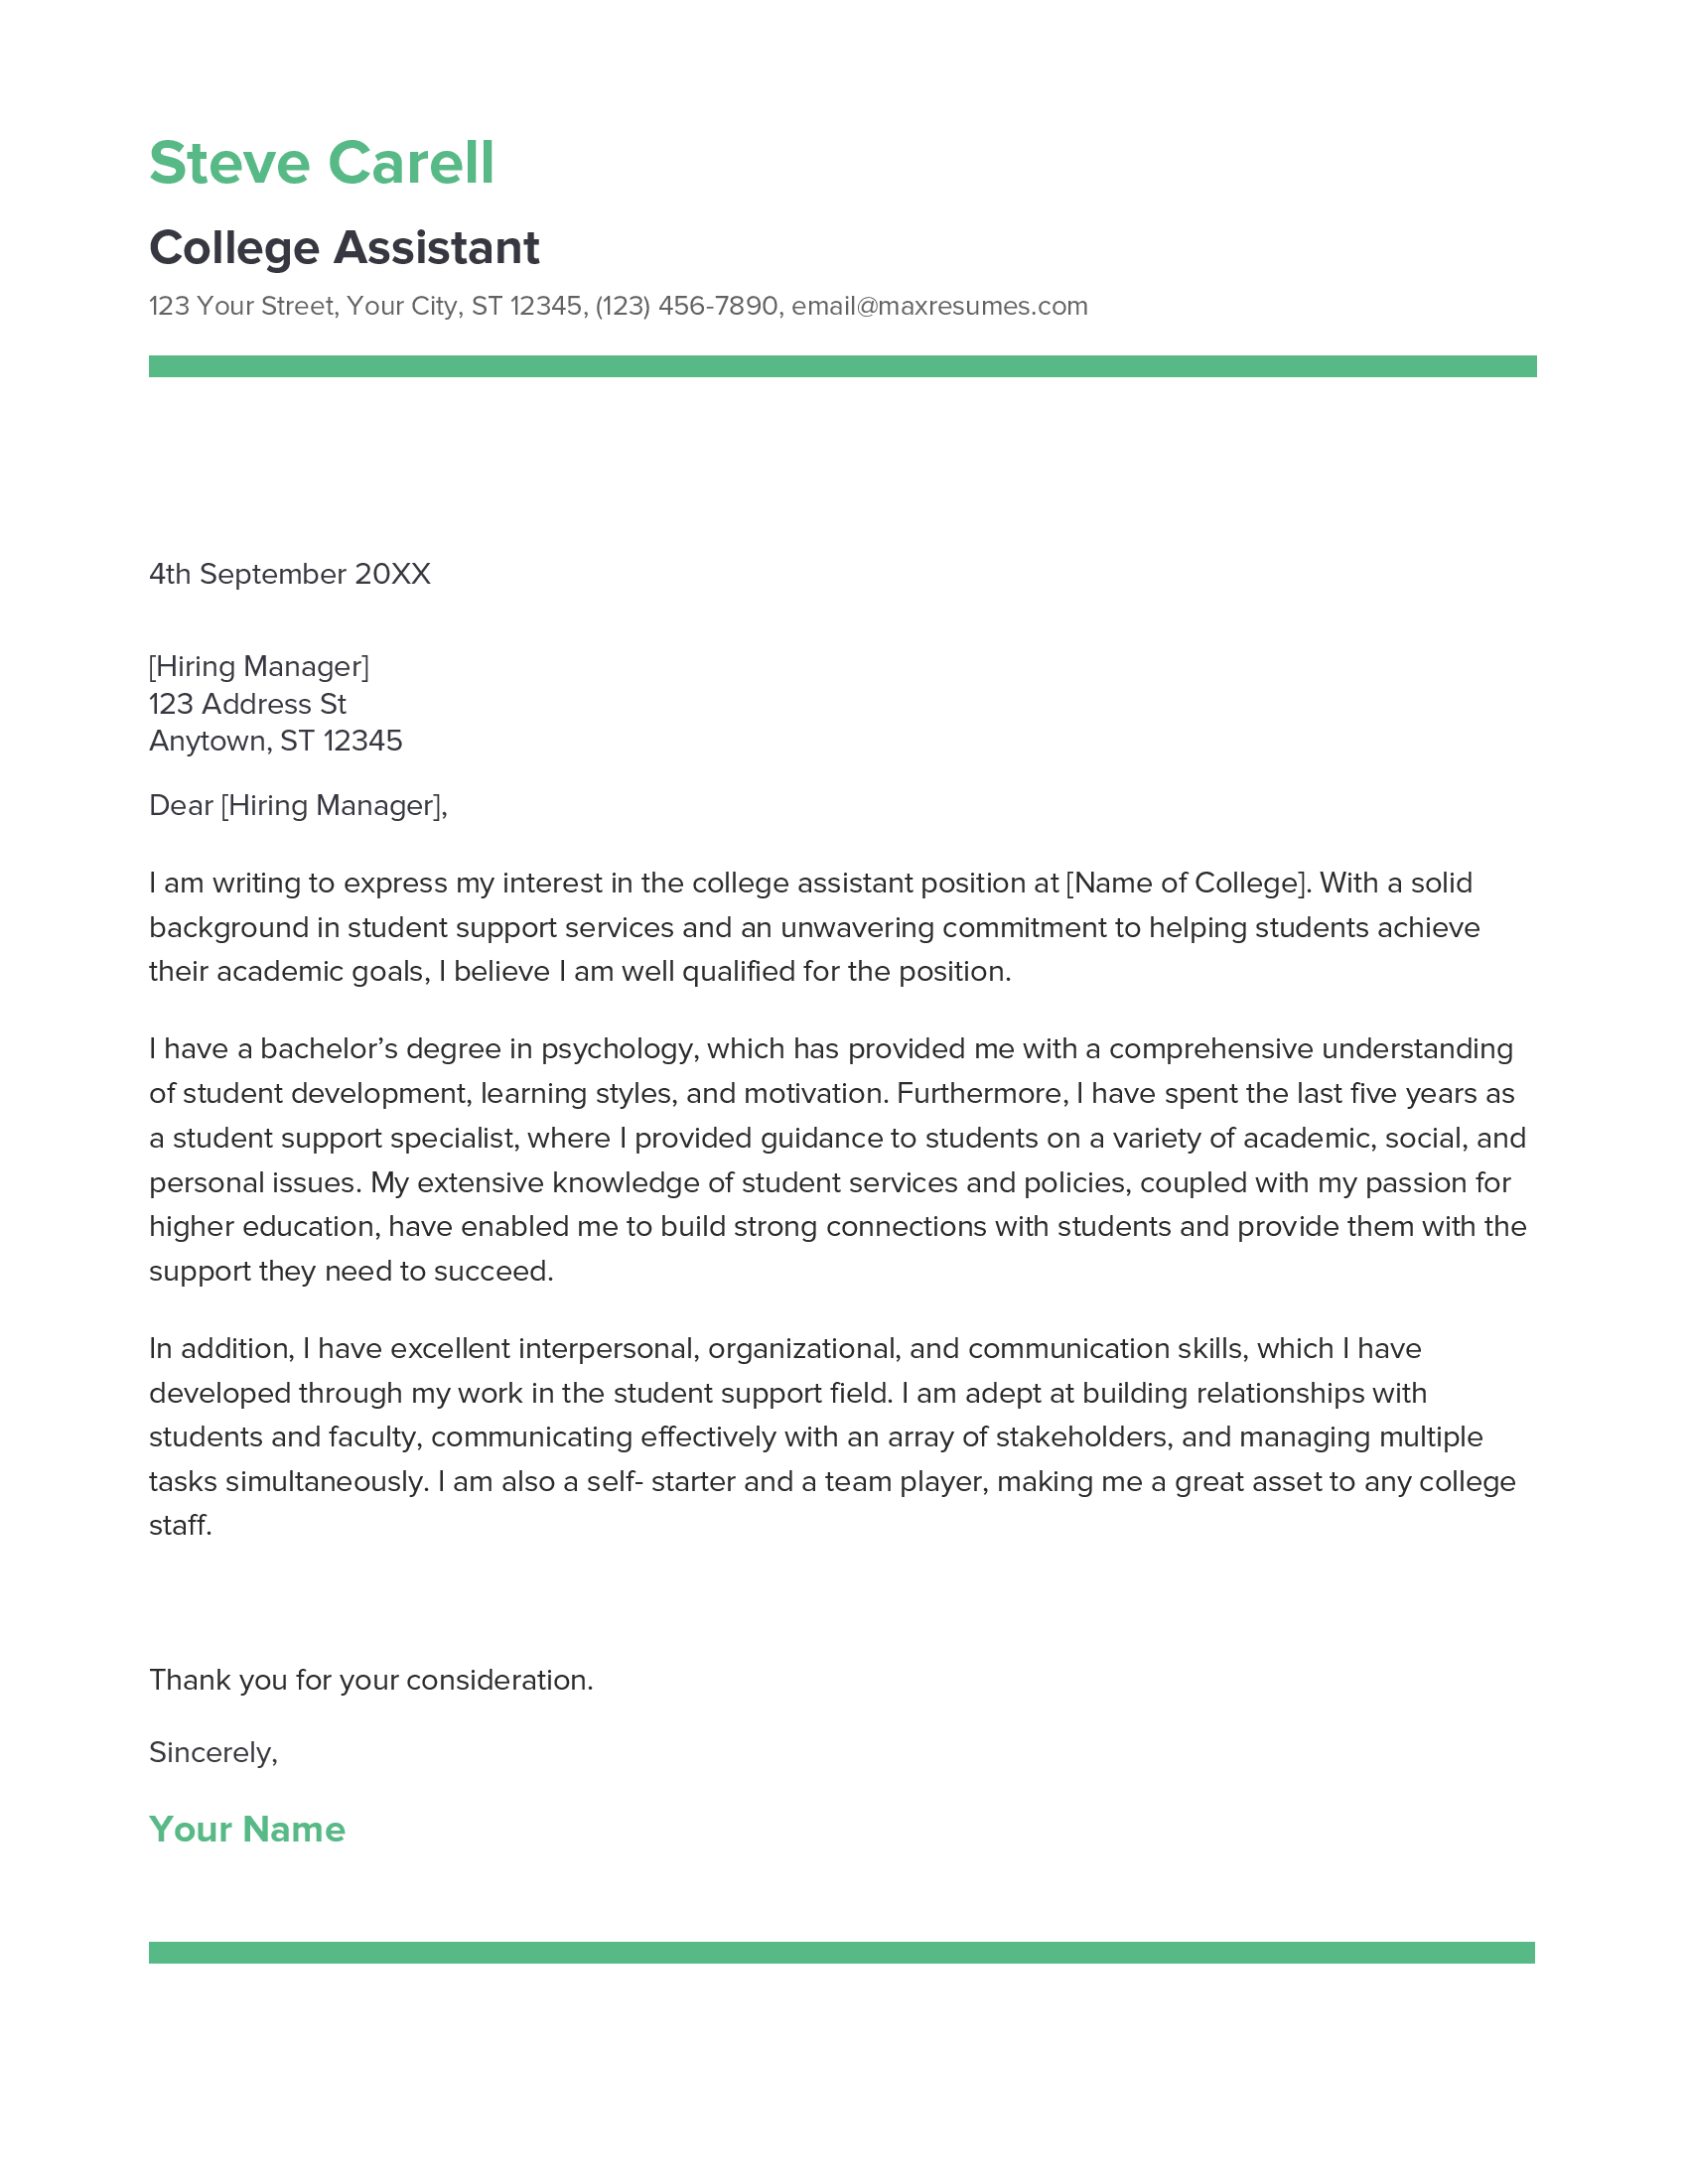 College Assistant Cover Letter Example